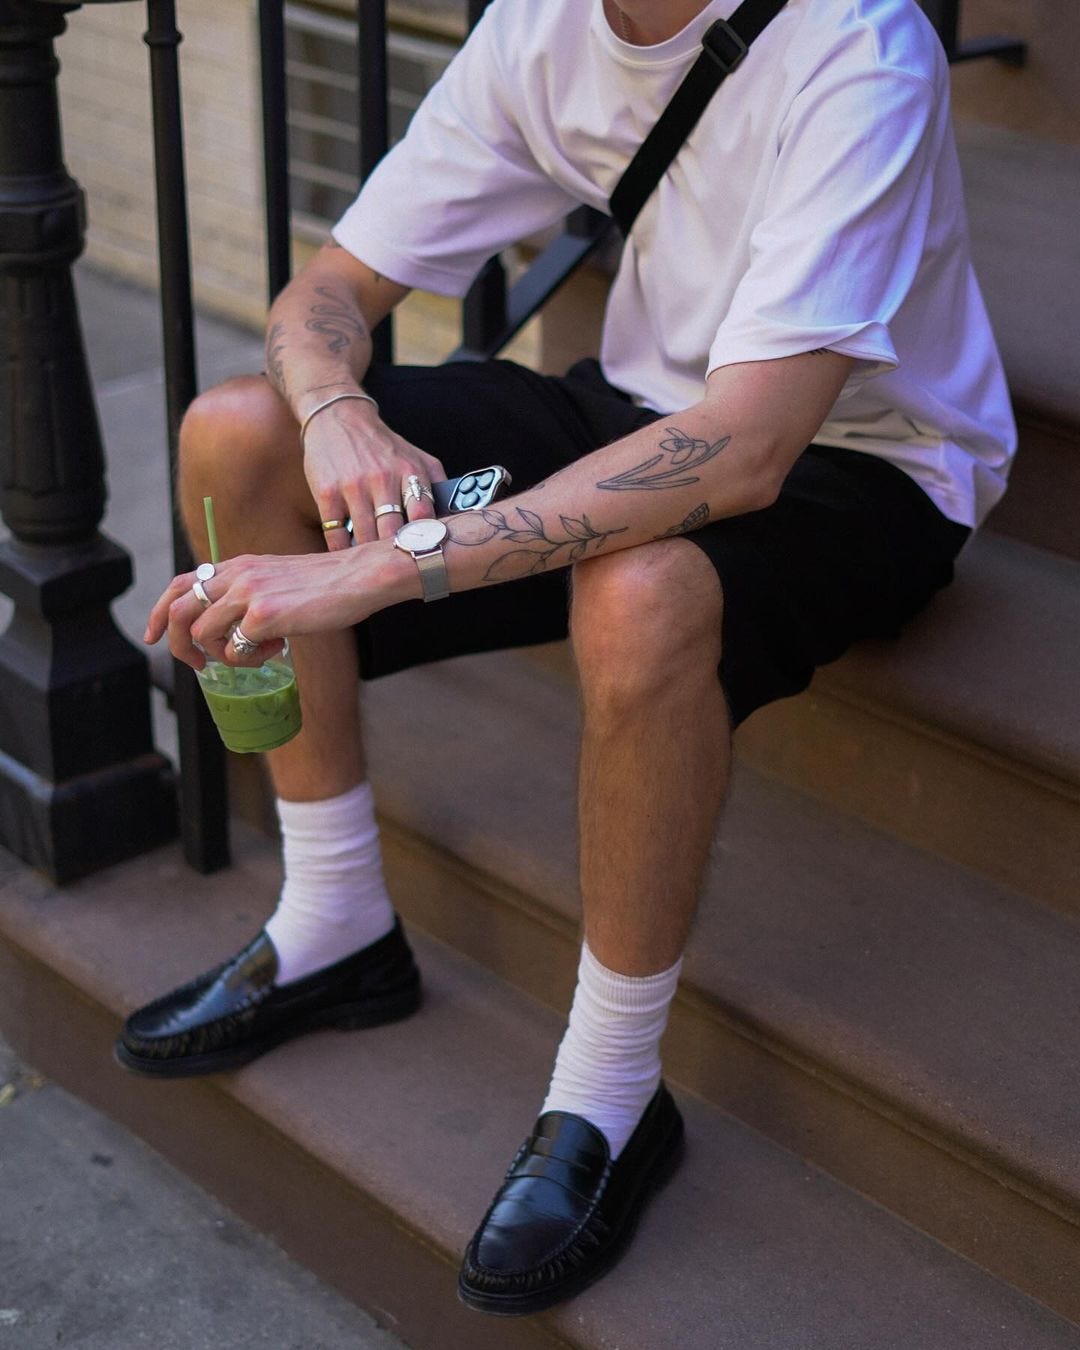 image of a man from the neck down. he's wearing a white t-shirt, black fanny pack slung over his shoulder, black shorts and white socks with black penny loafers. he's holding a green drink